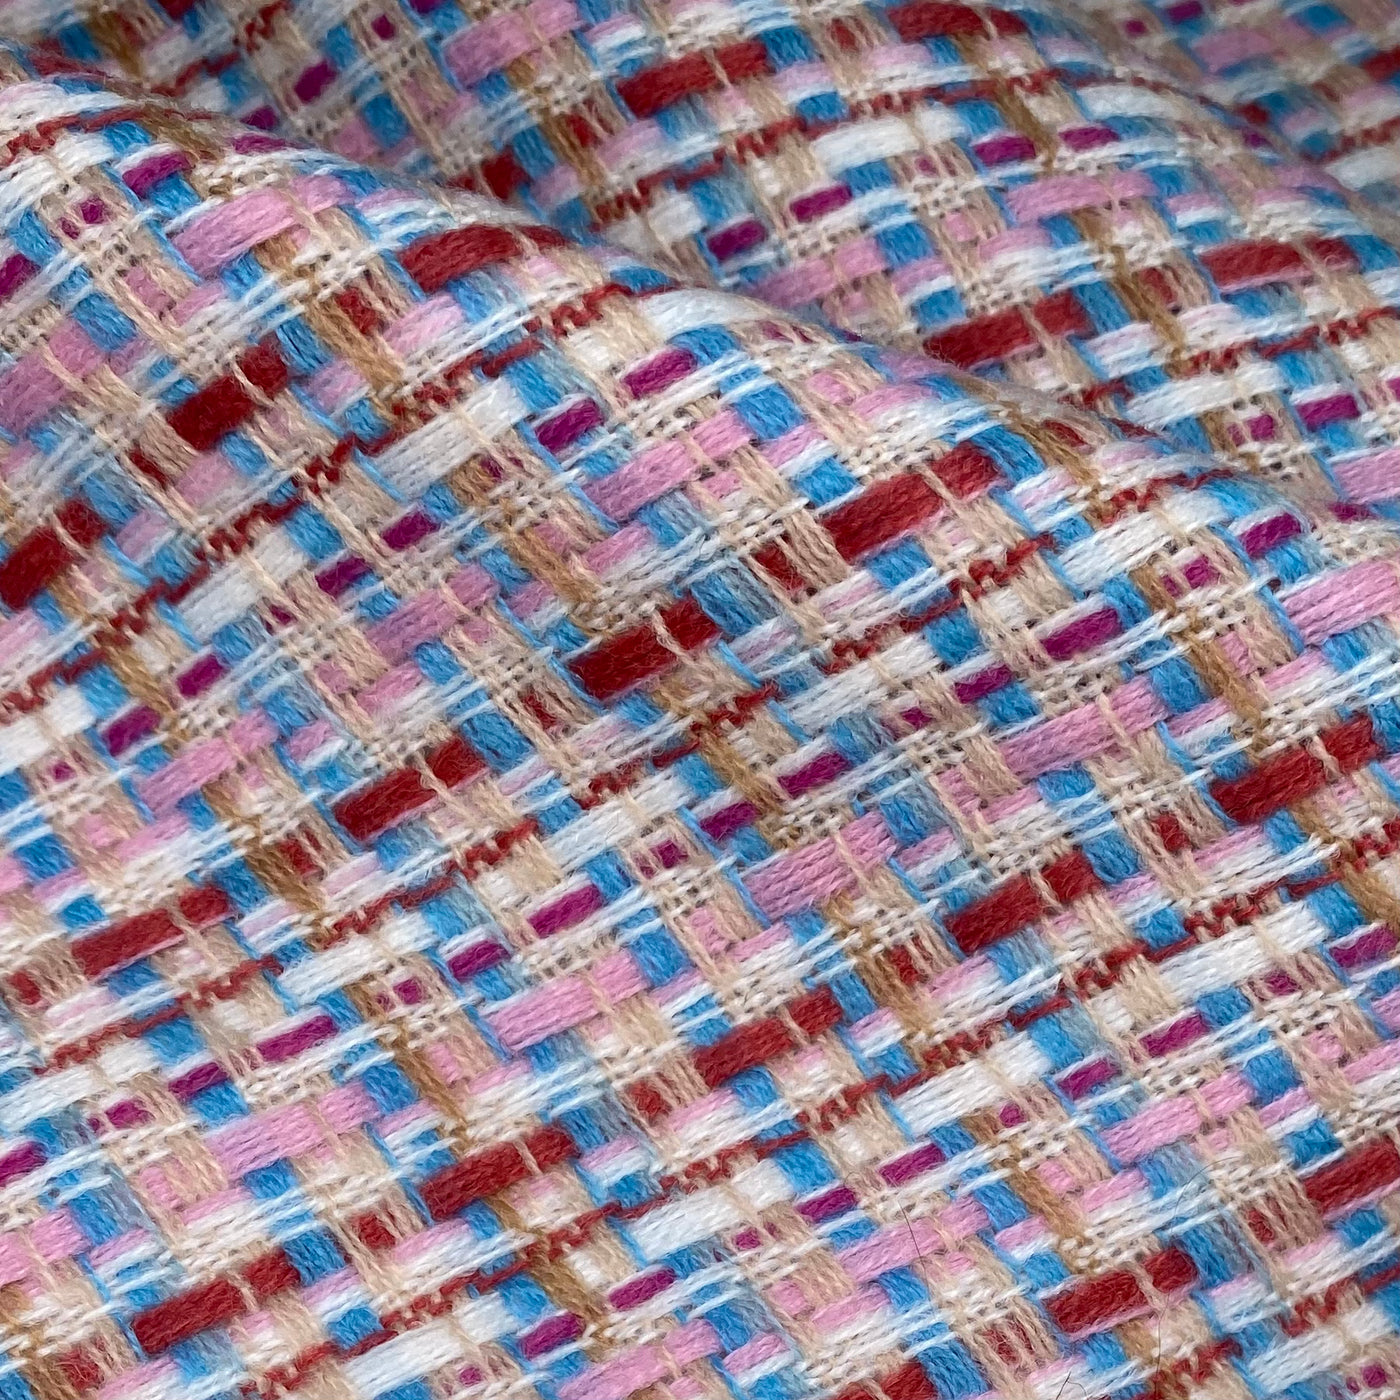 Polyester/Rayon Boucle - White/Pink/Red/Blue/Beige